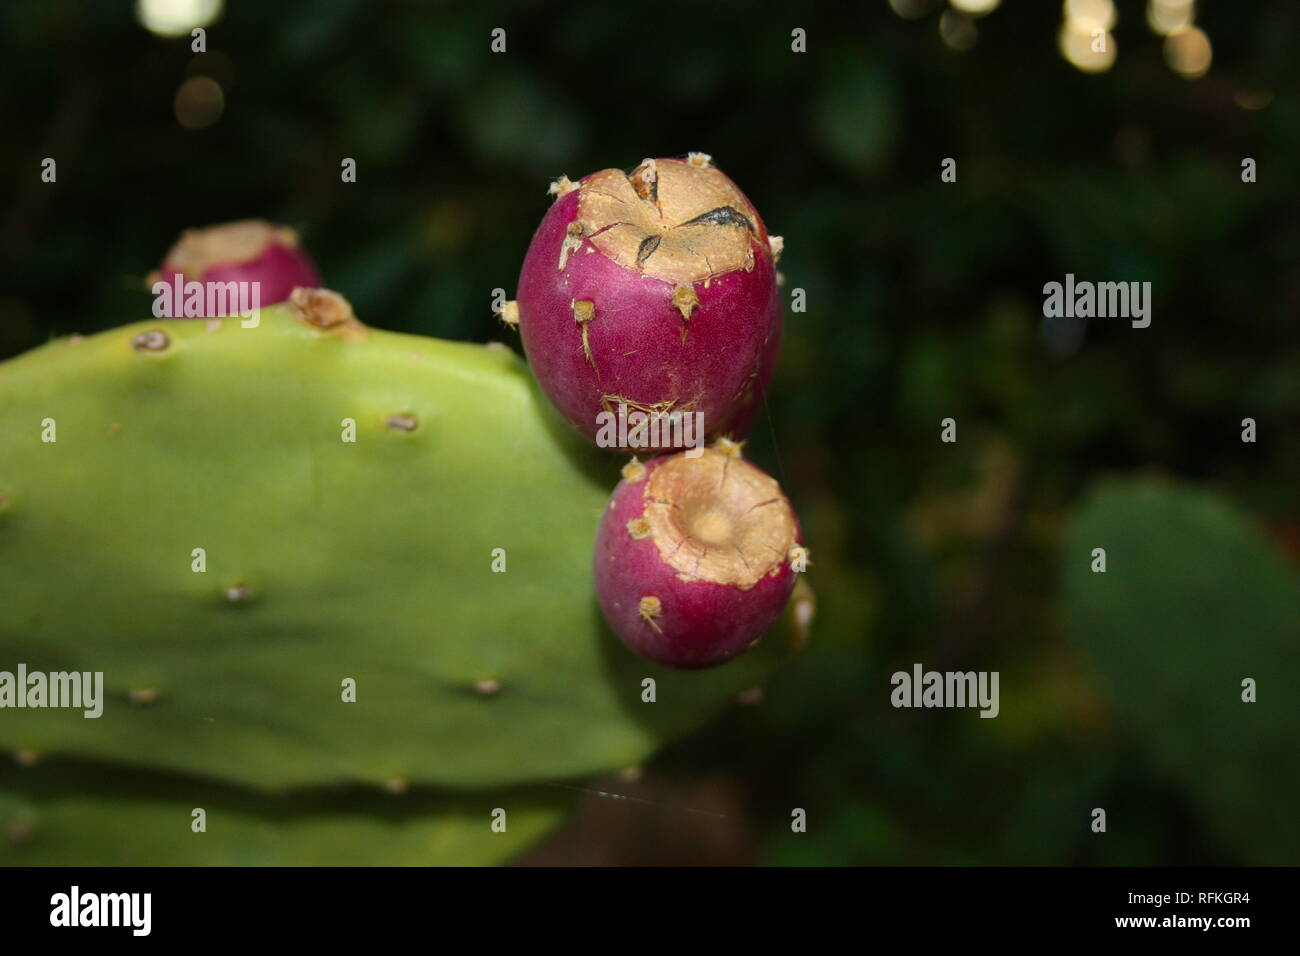 Plant And Fruit Of Prickly Pear Of Purple Color Ripe Juicy Tasty Stock Photo Alamy